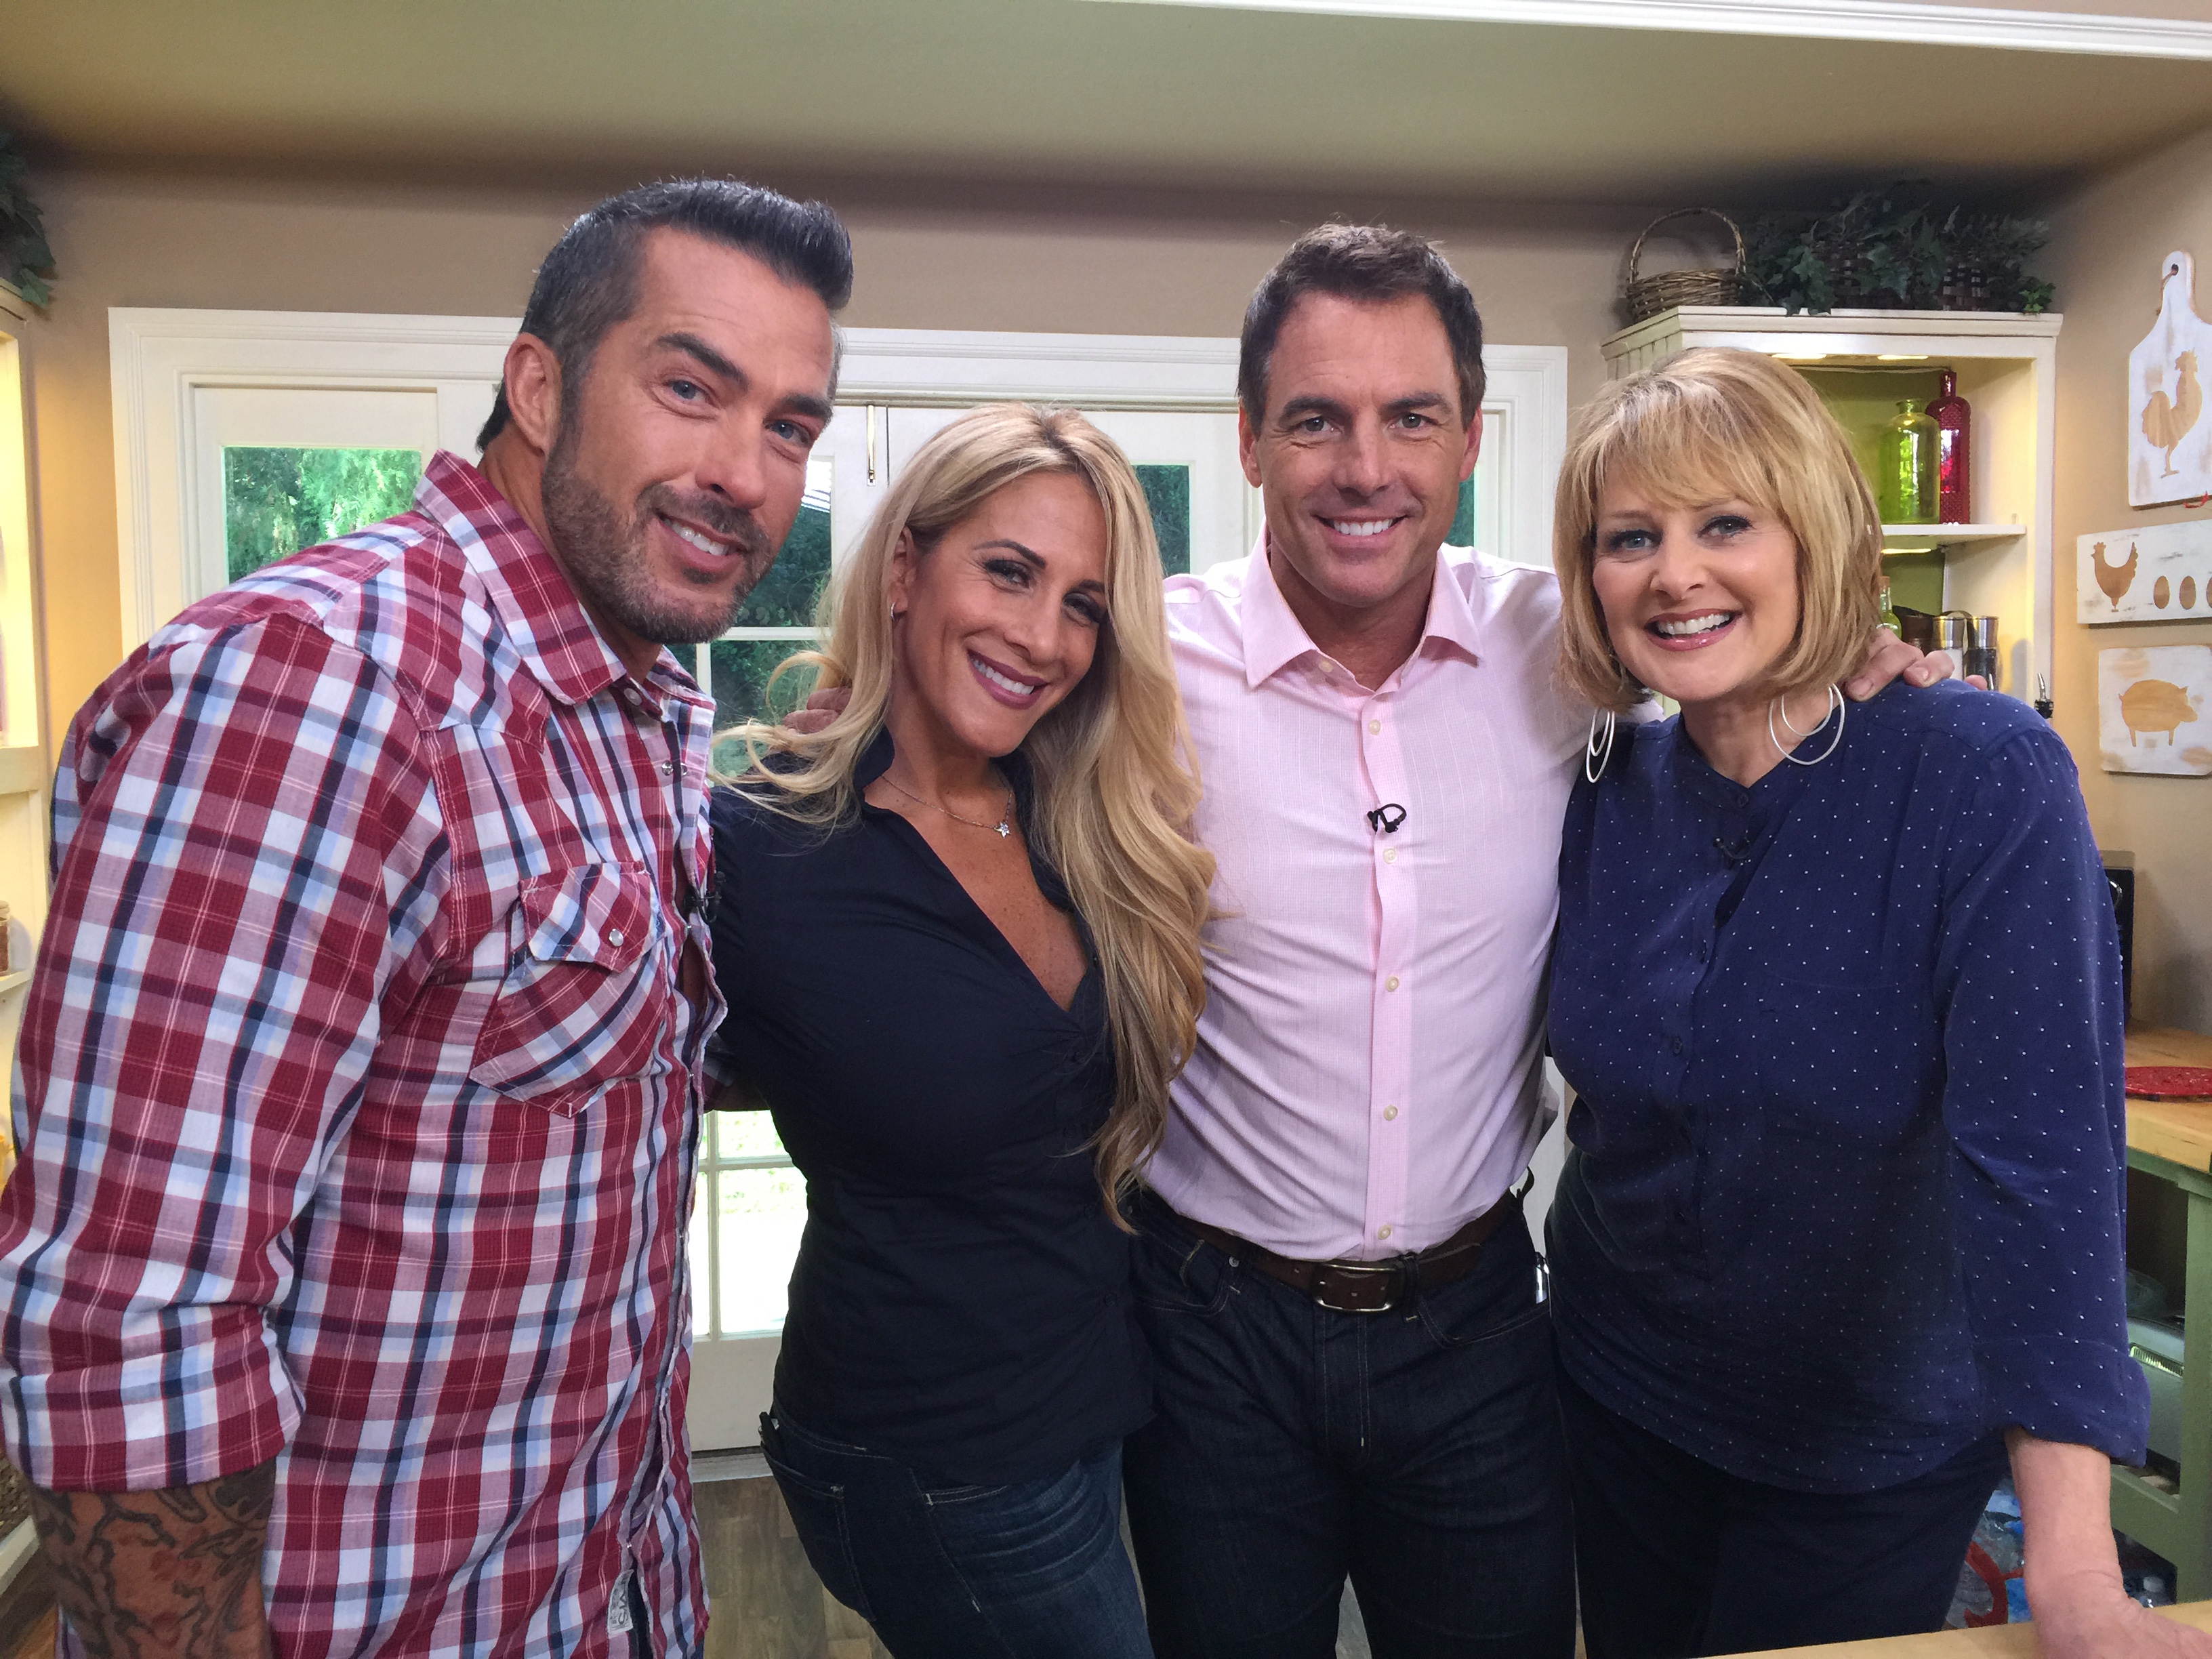 Skip Bedell, Alison Bedell, Mark Steines and Cristina Ferrer, Home And Family on Hallmark Channel, October, 2014